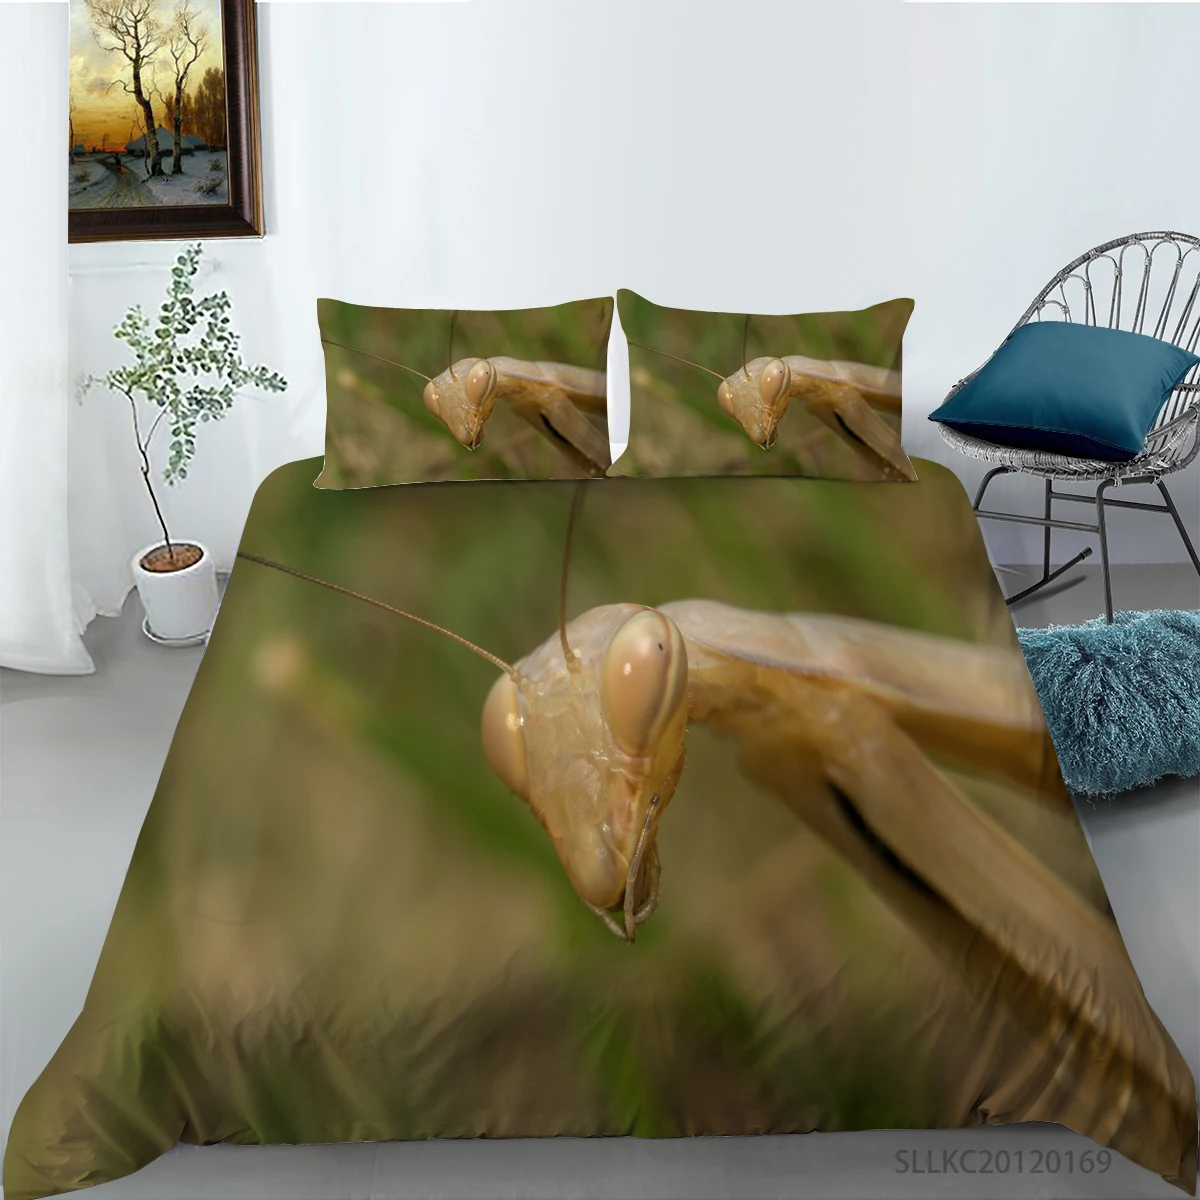 

New 3D Lifelike Insect Printing Duvet Cover Set with pillowcases Bedclothes Home Textiles Drop Shipping